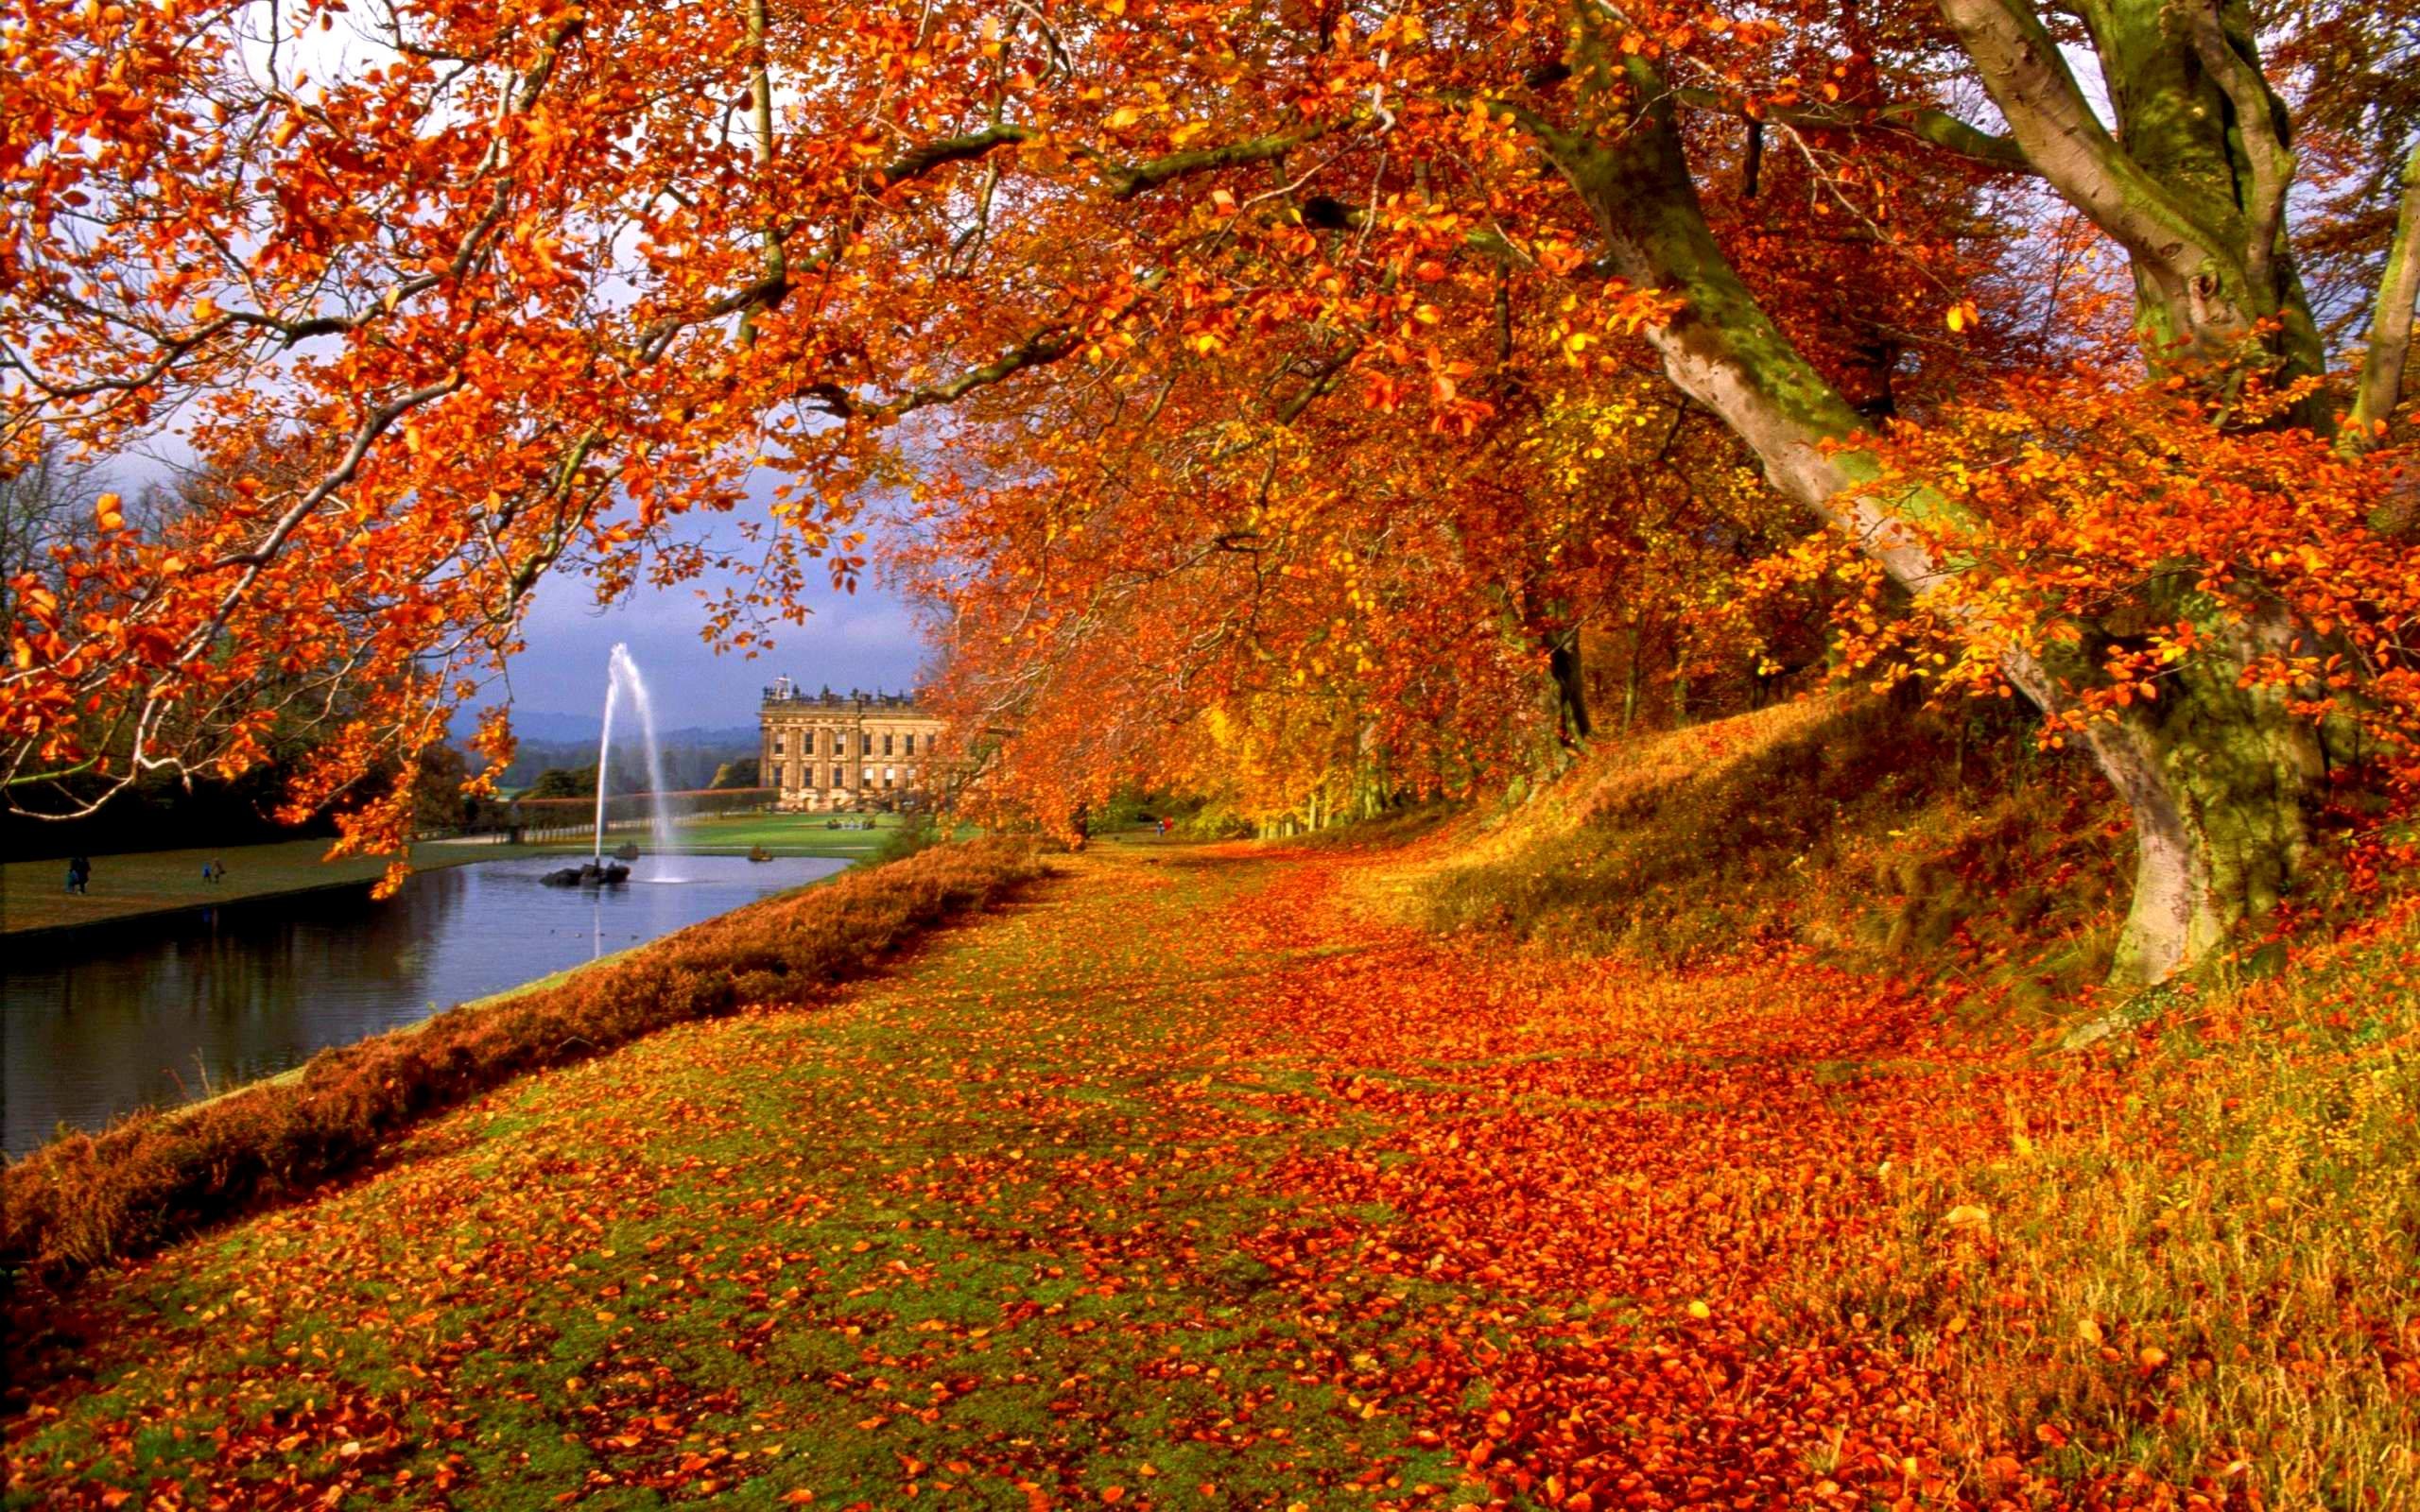 Screensavers And Wallpaper Autumn Scene 53 Images